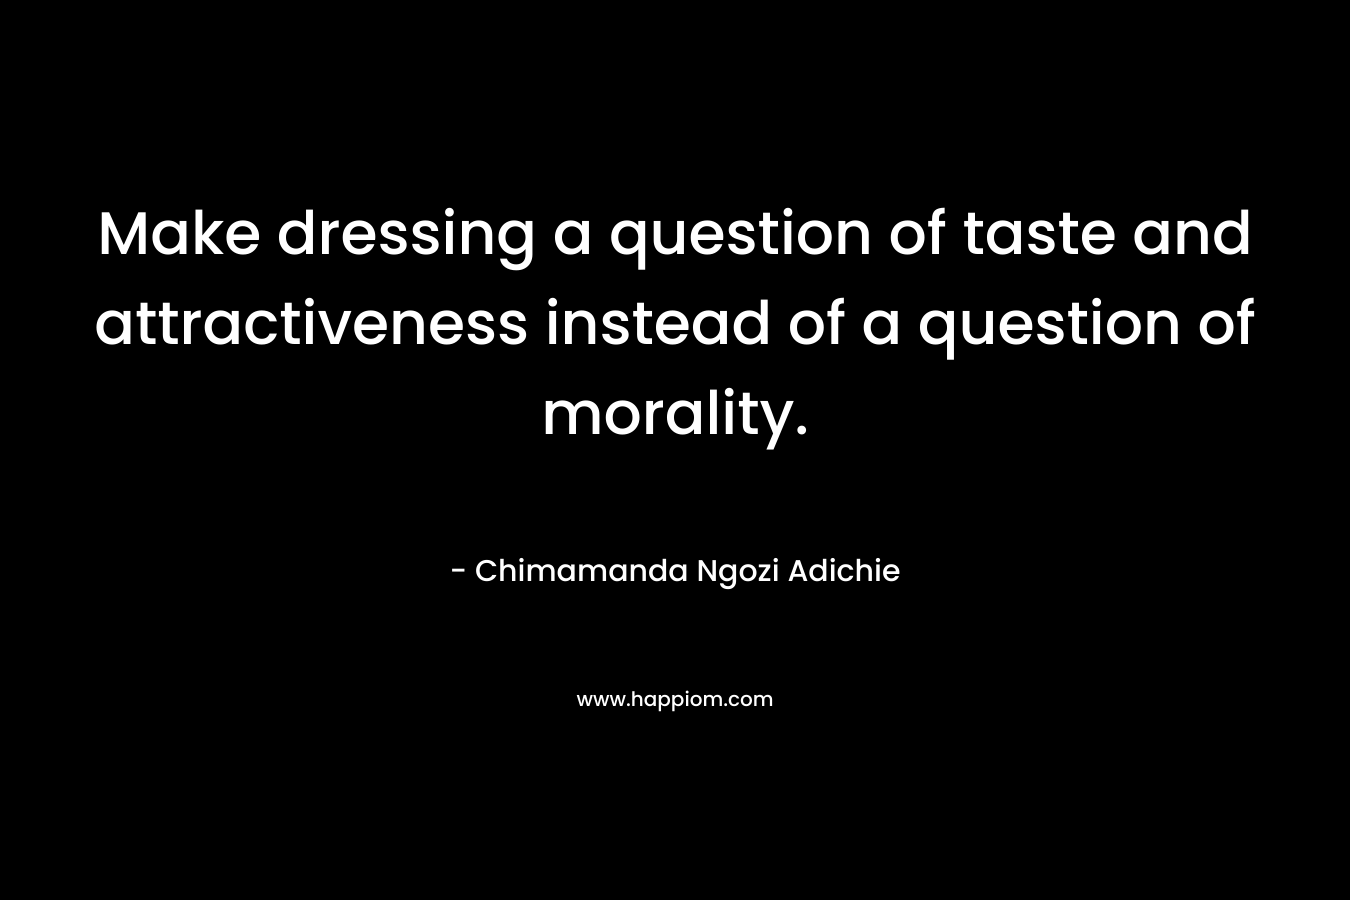 Make dressing a question of taste and attractiveness instead of a question of morality. – Chimamanda Ngozi Adichie